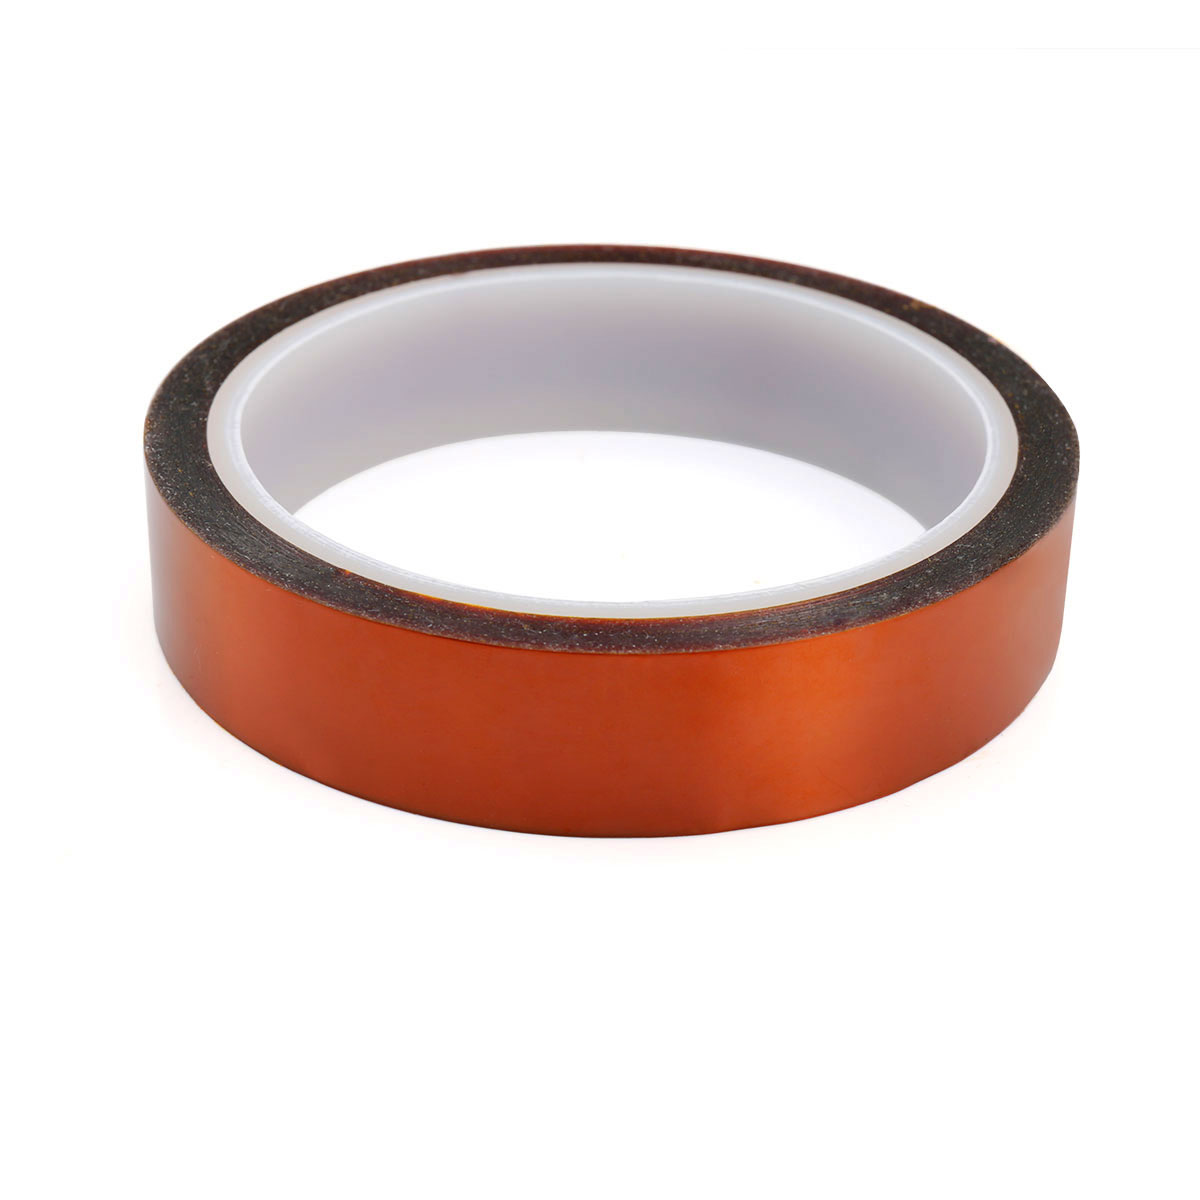 20mm * 33m High Temperature Heat Resistant Adhelsive Kapton Tape for Electrical Insulation